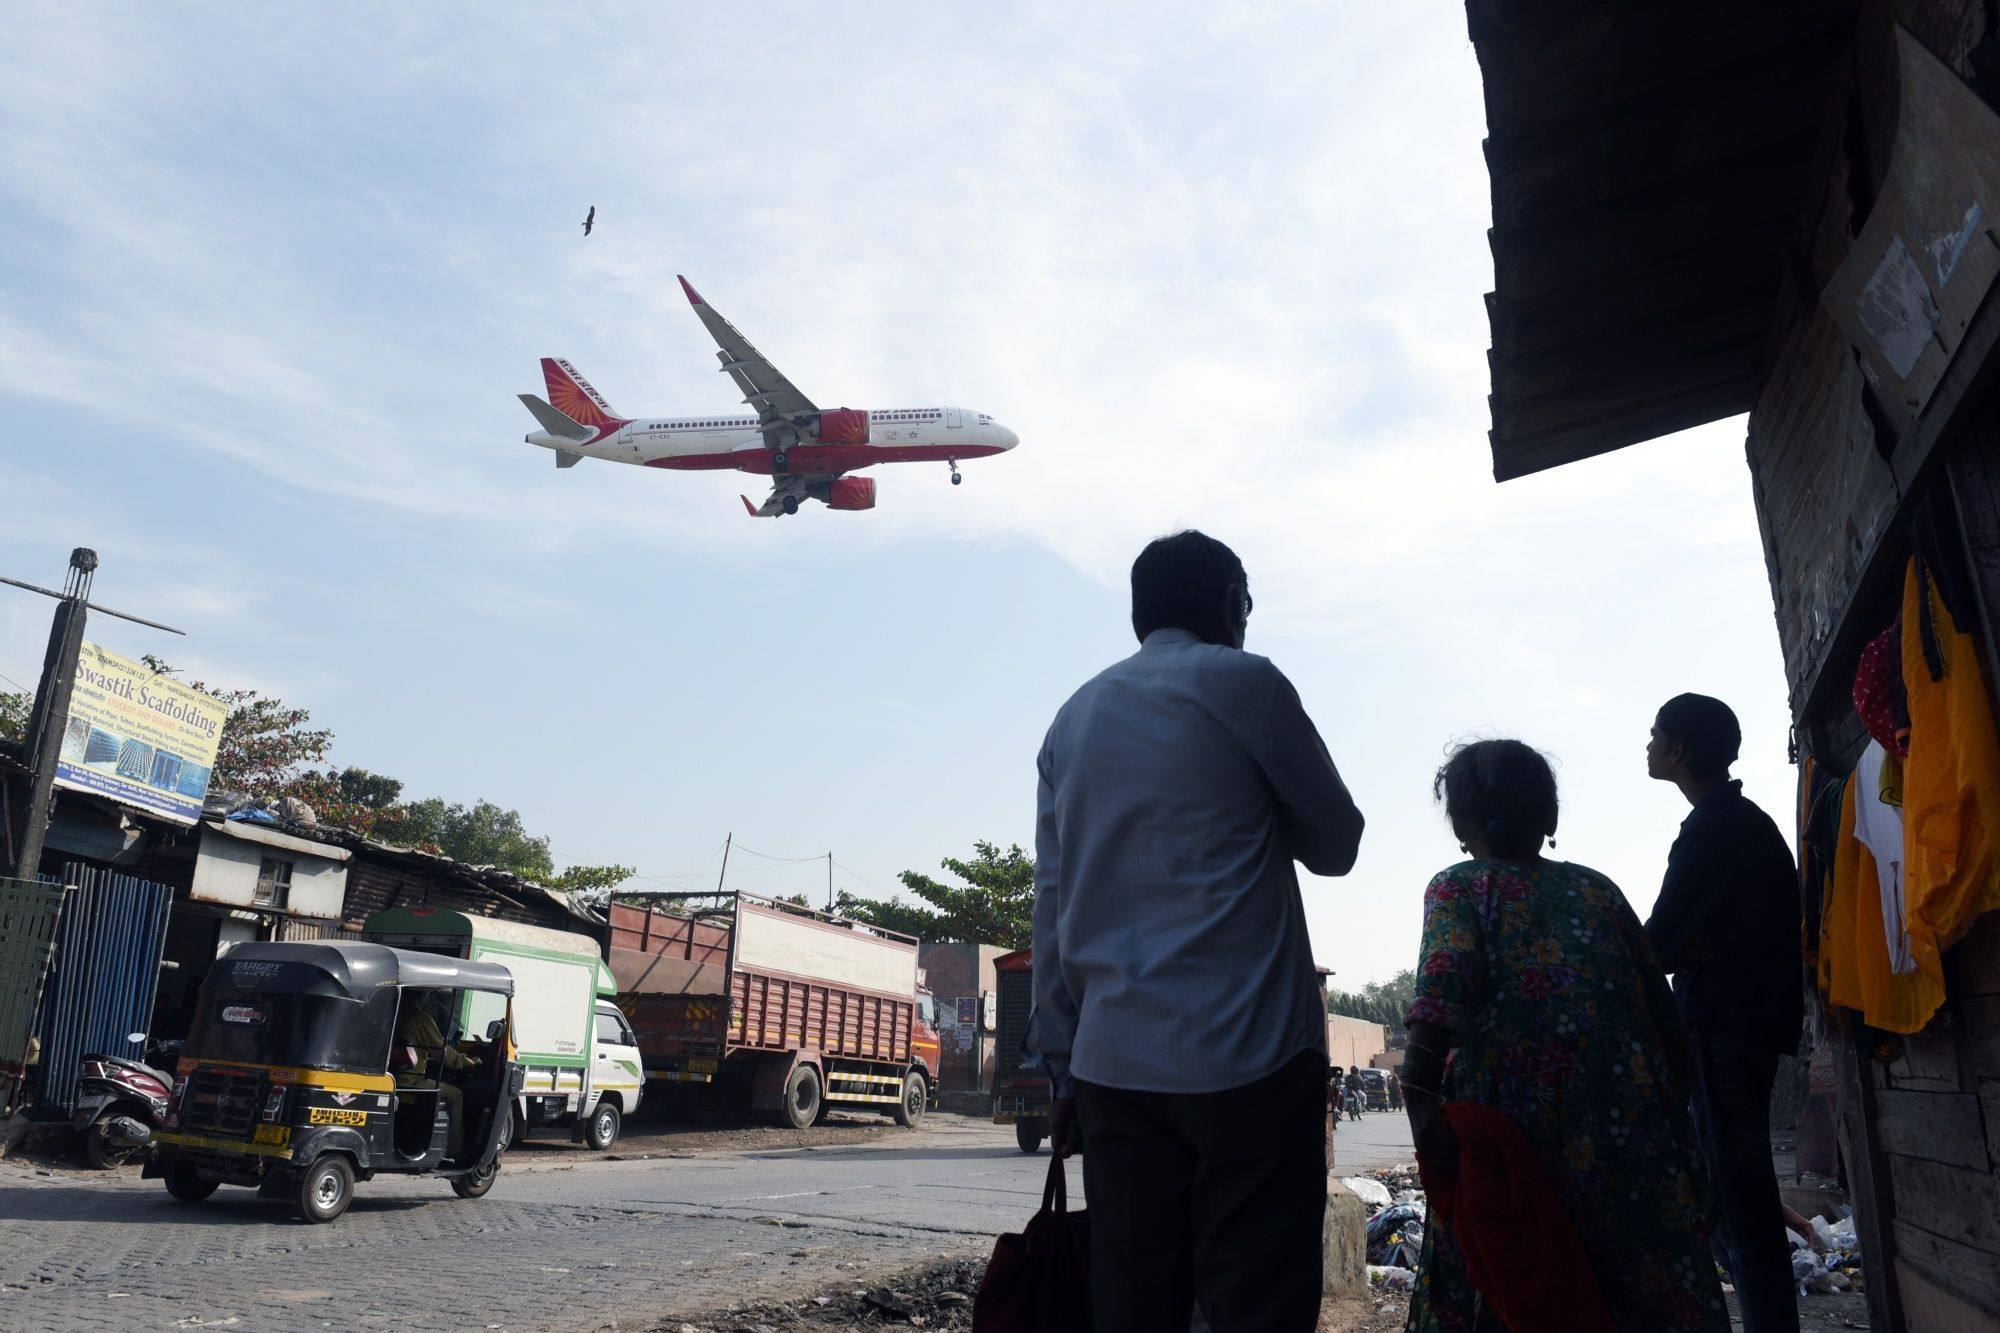 Air India faces a long, difficult road to regaining its competitive edge, analysts say. Photo: Bloomberg